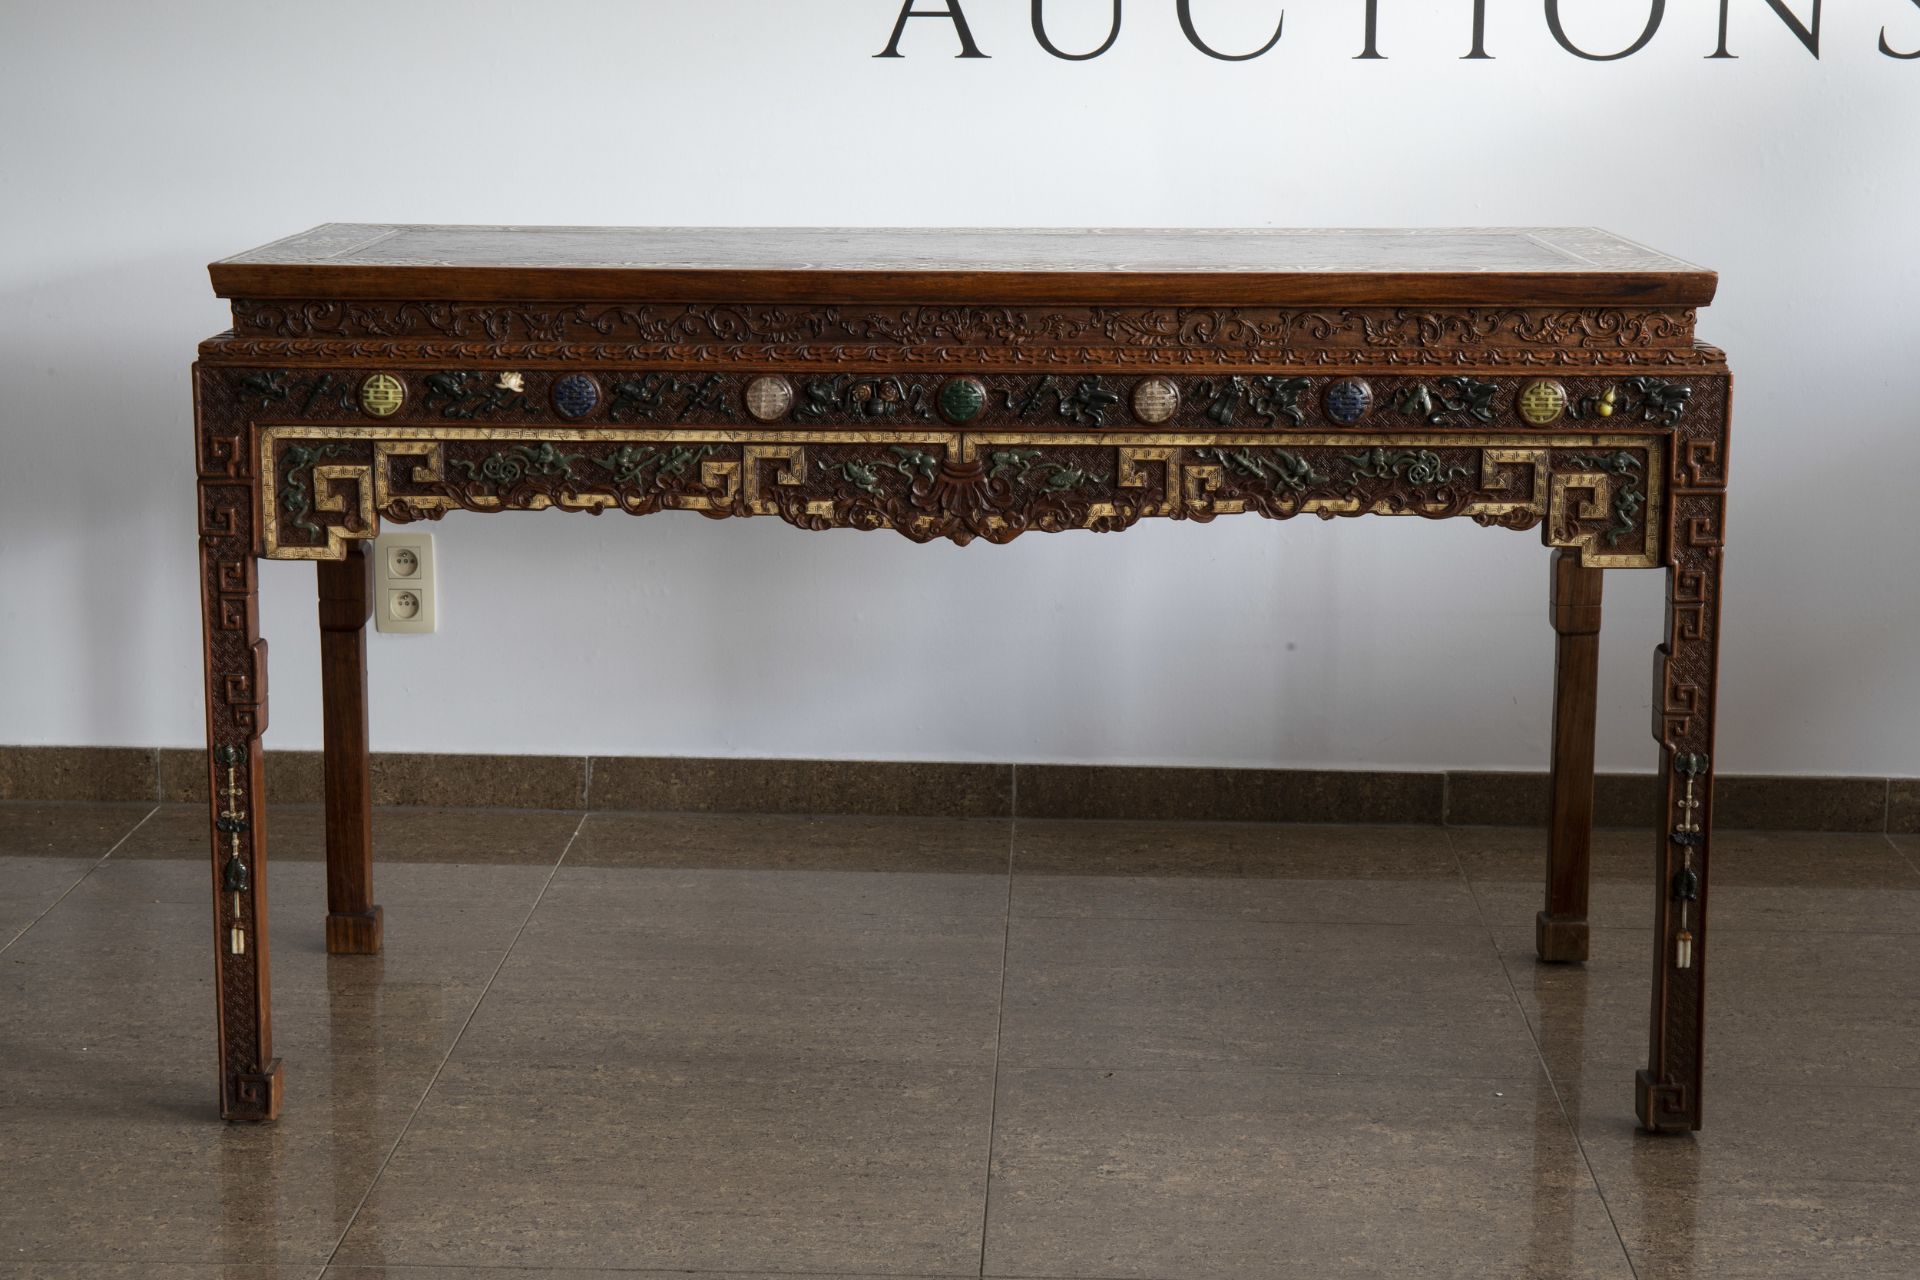 A Chinese bone and hardstone inlaid rectangular wooden table, 20th C. - Image 5 of 7